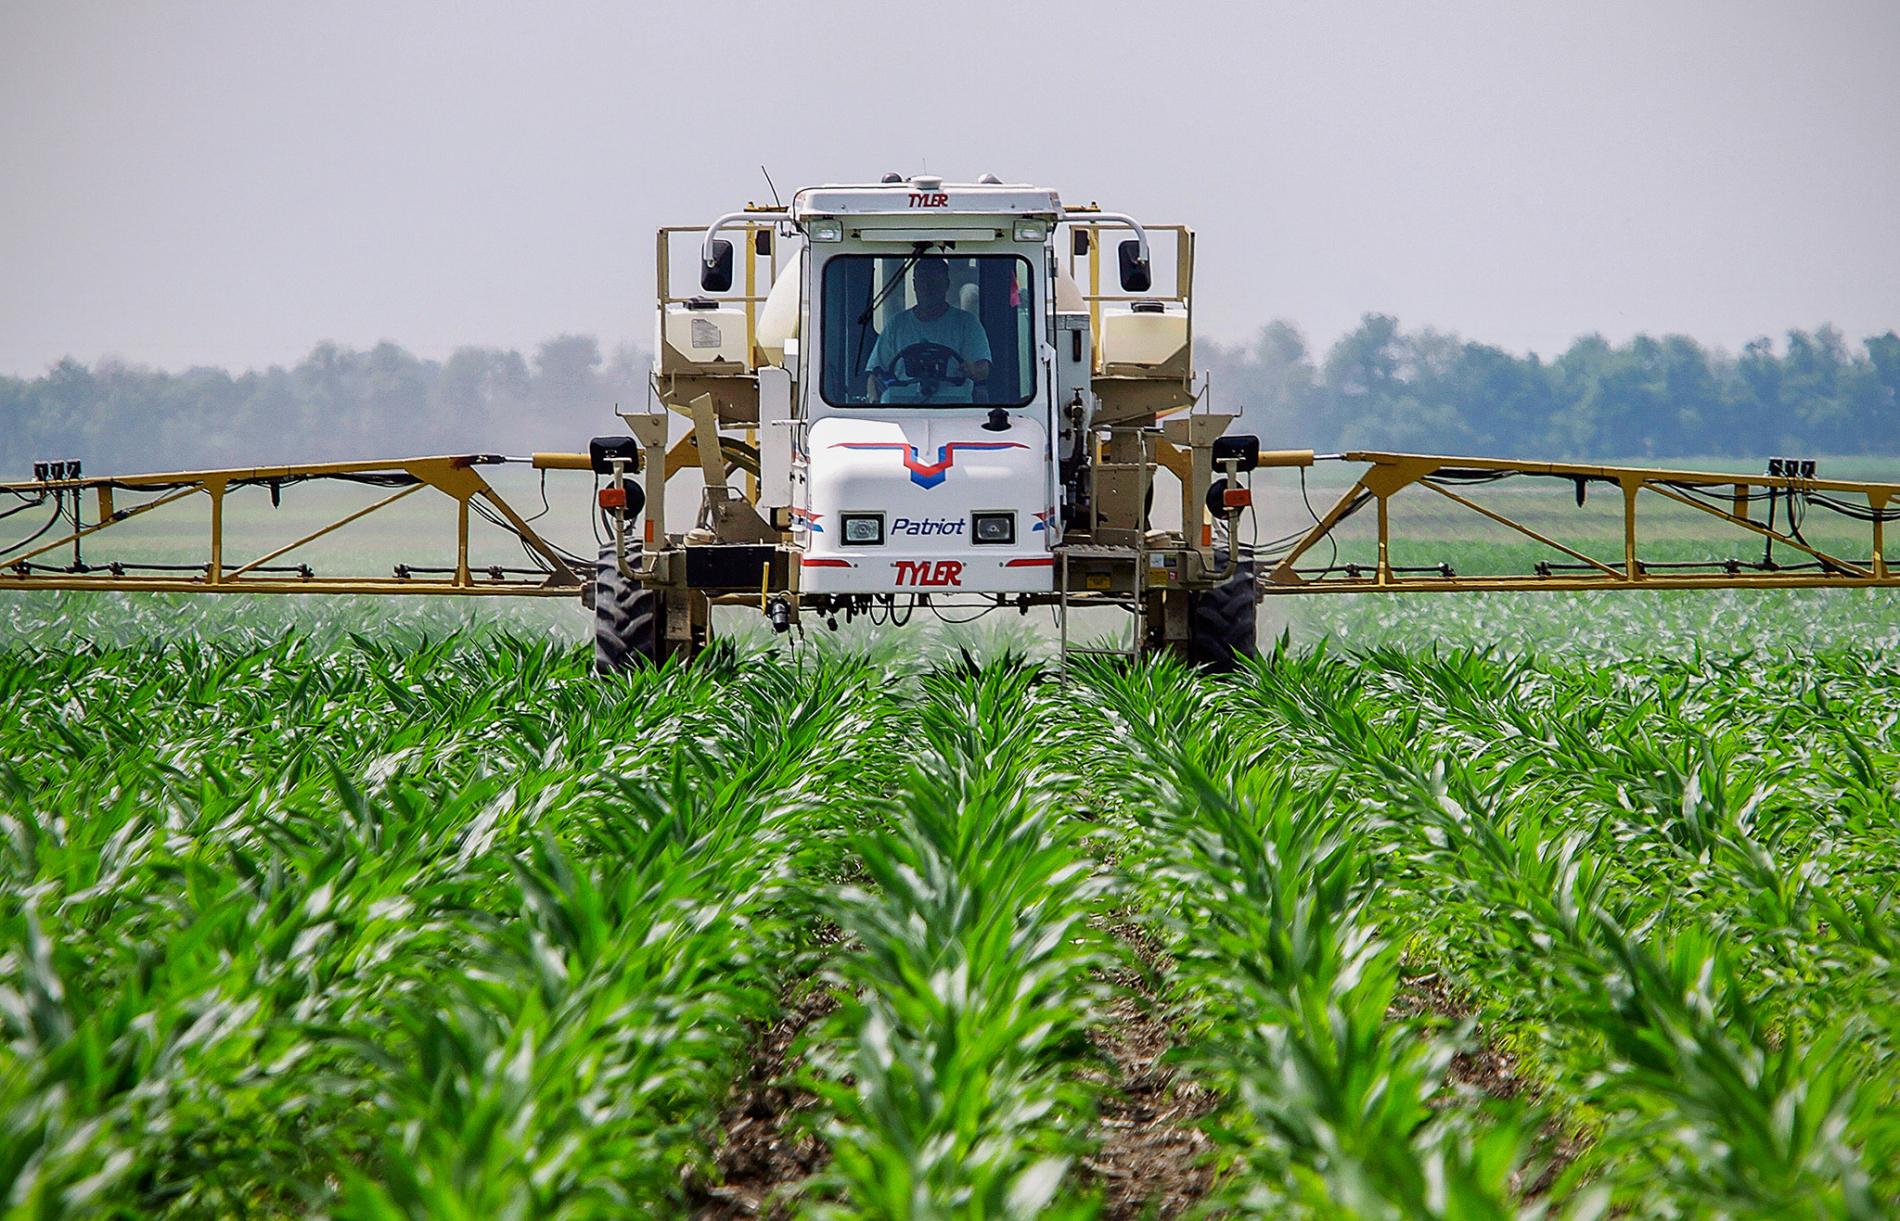 What Do We Really Know About Roundup Weed Killer? What can we do about it?